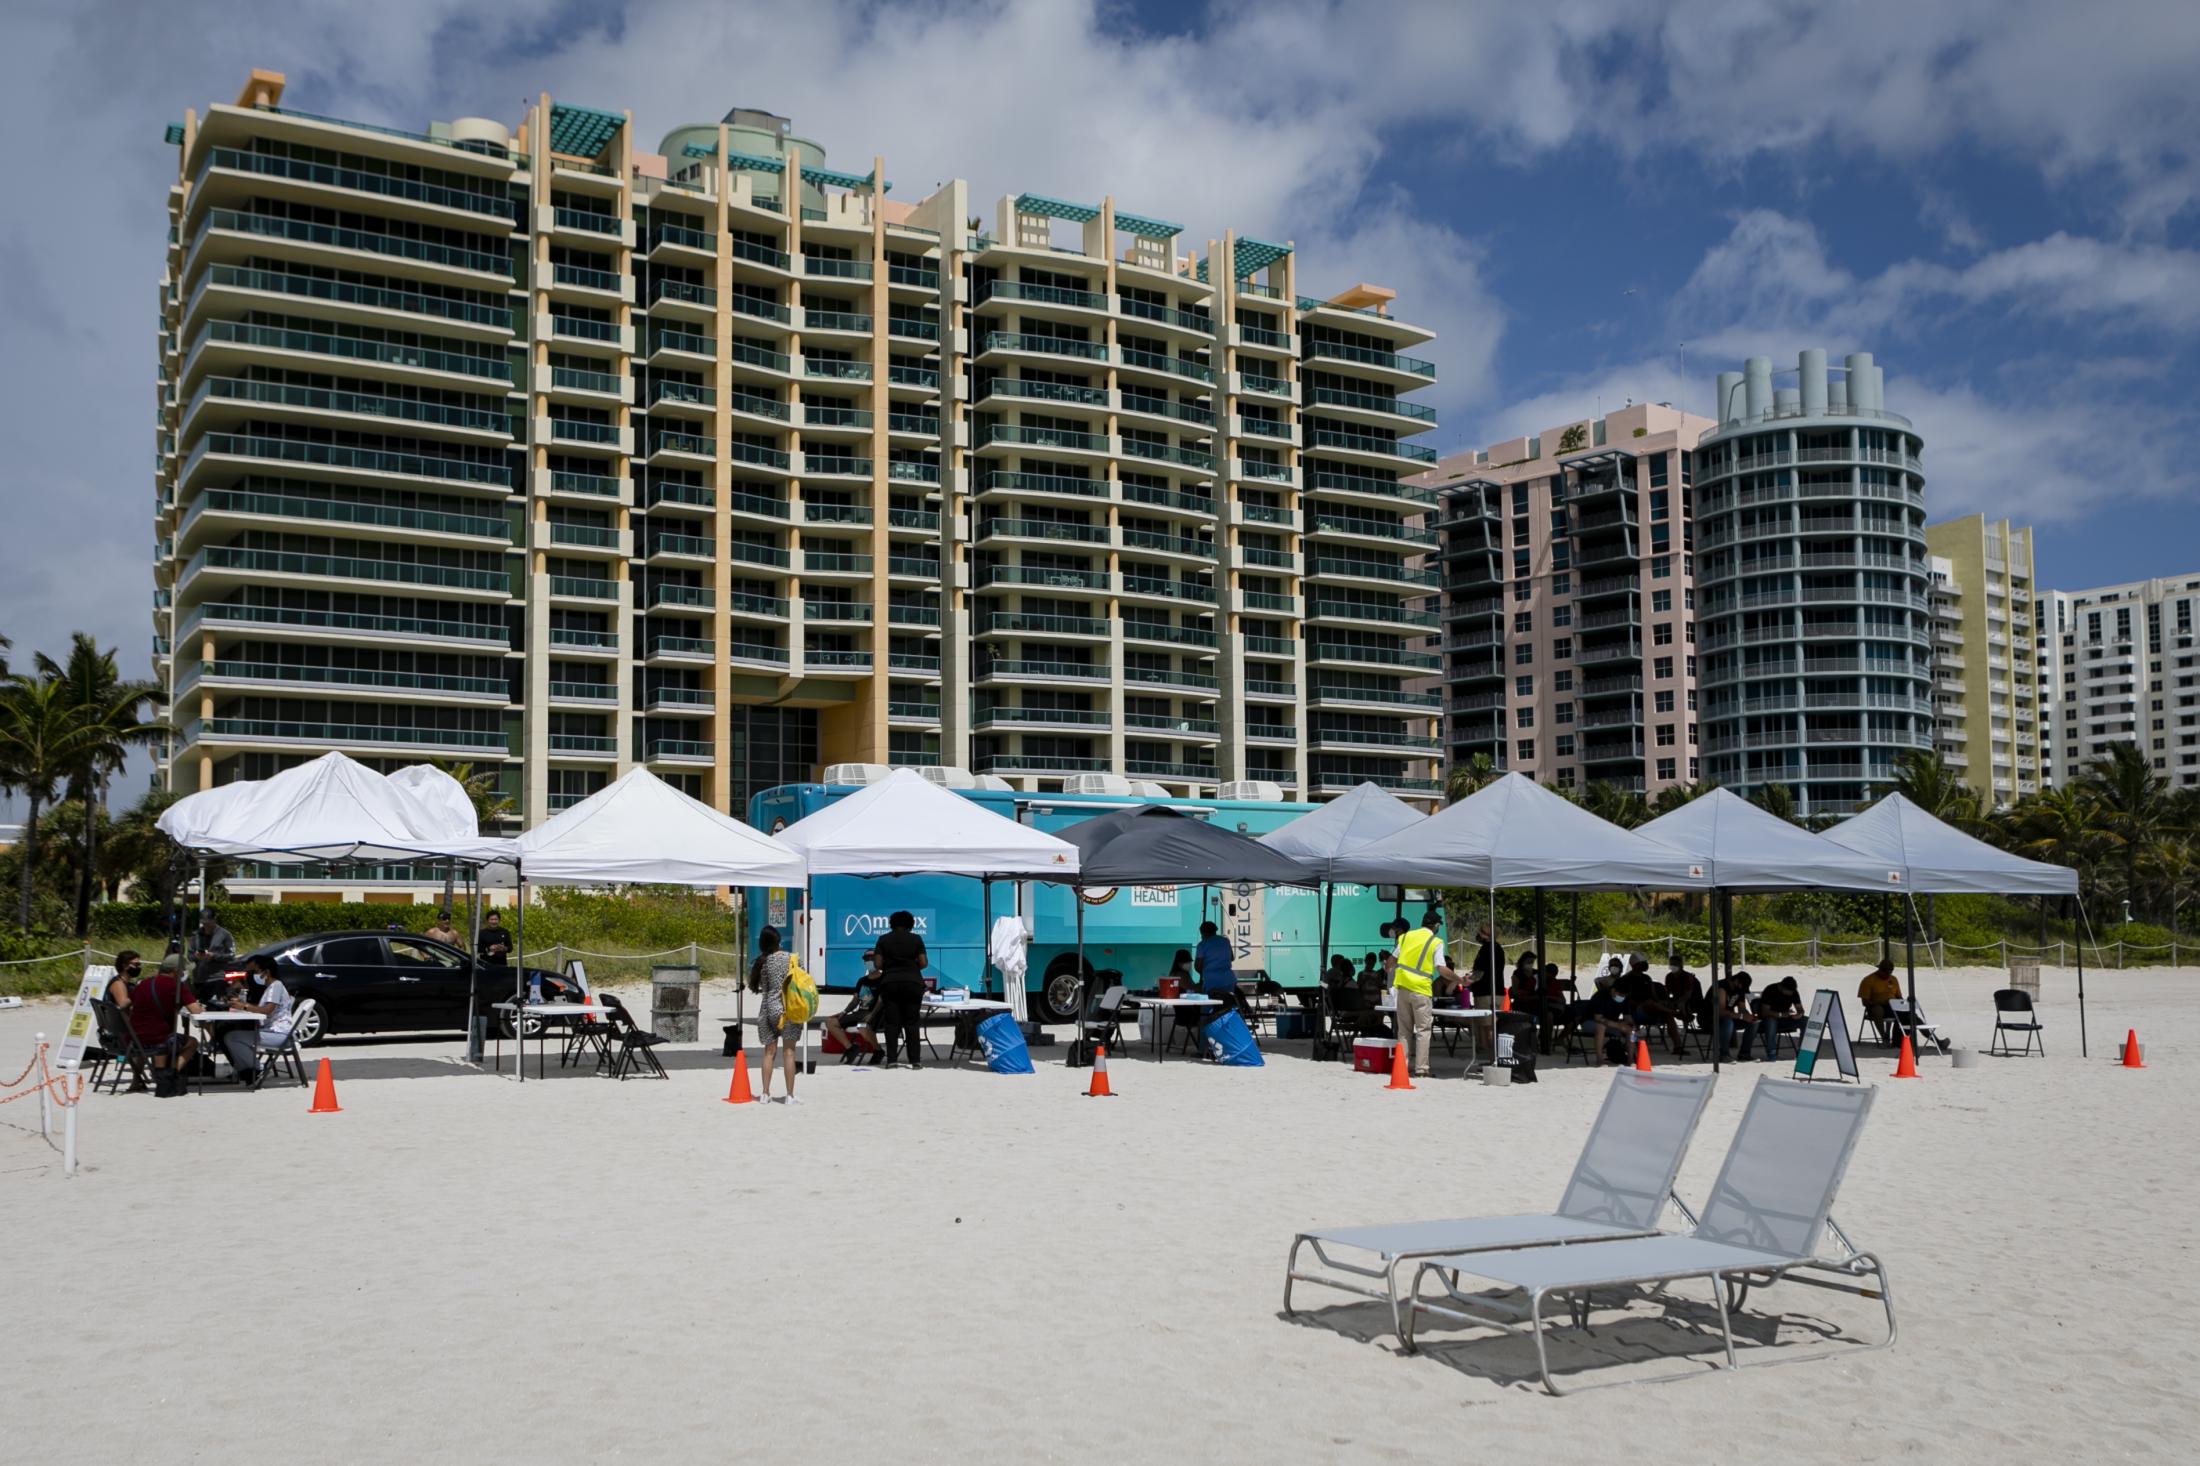 2021 - Tourists get Johnson & Johnson COVID-19 vaccine at Miami Beach - A pop-up vaccination center is seen at the beach, in...